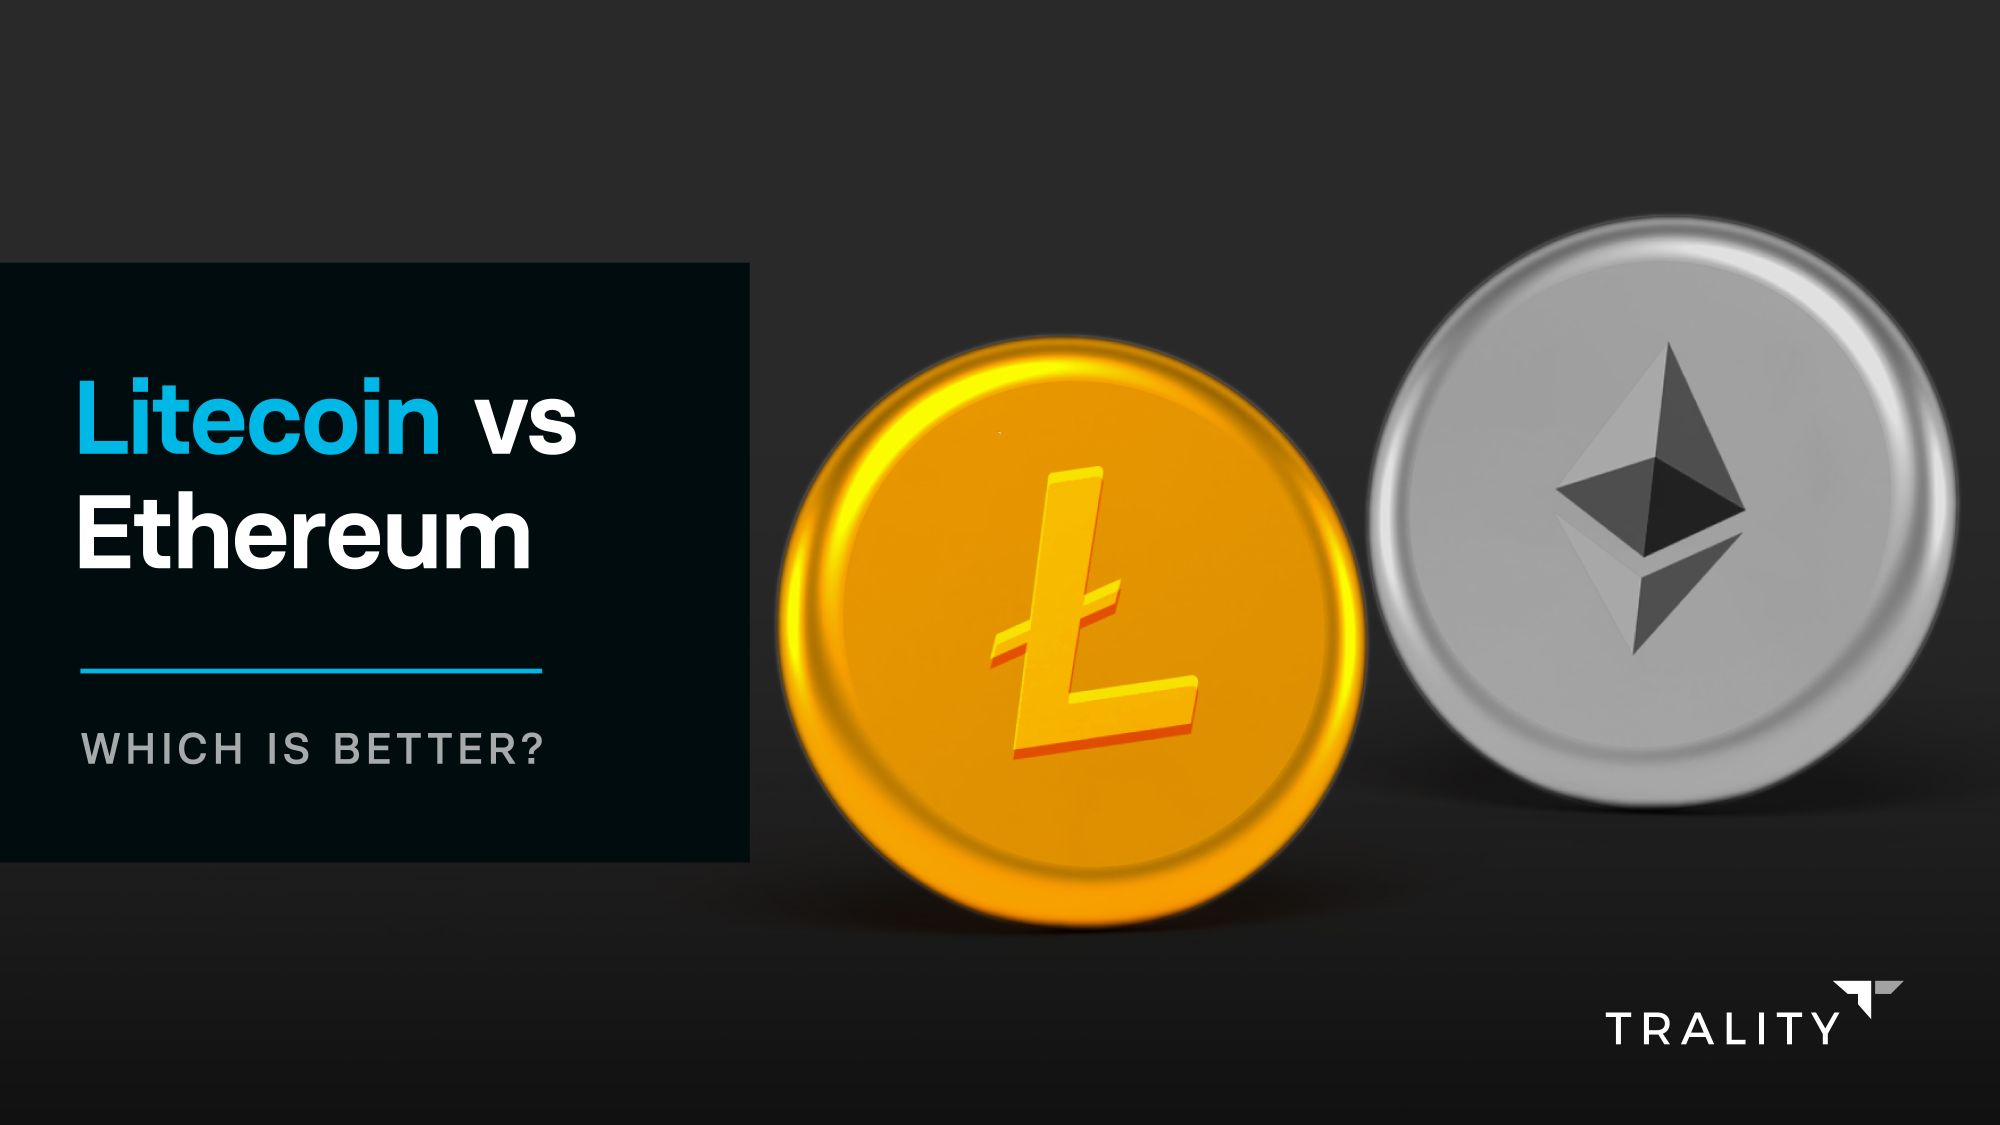 should i invest in bitcoin ethereeum or litecoin